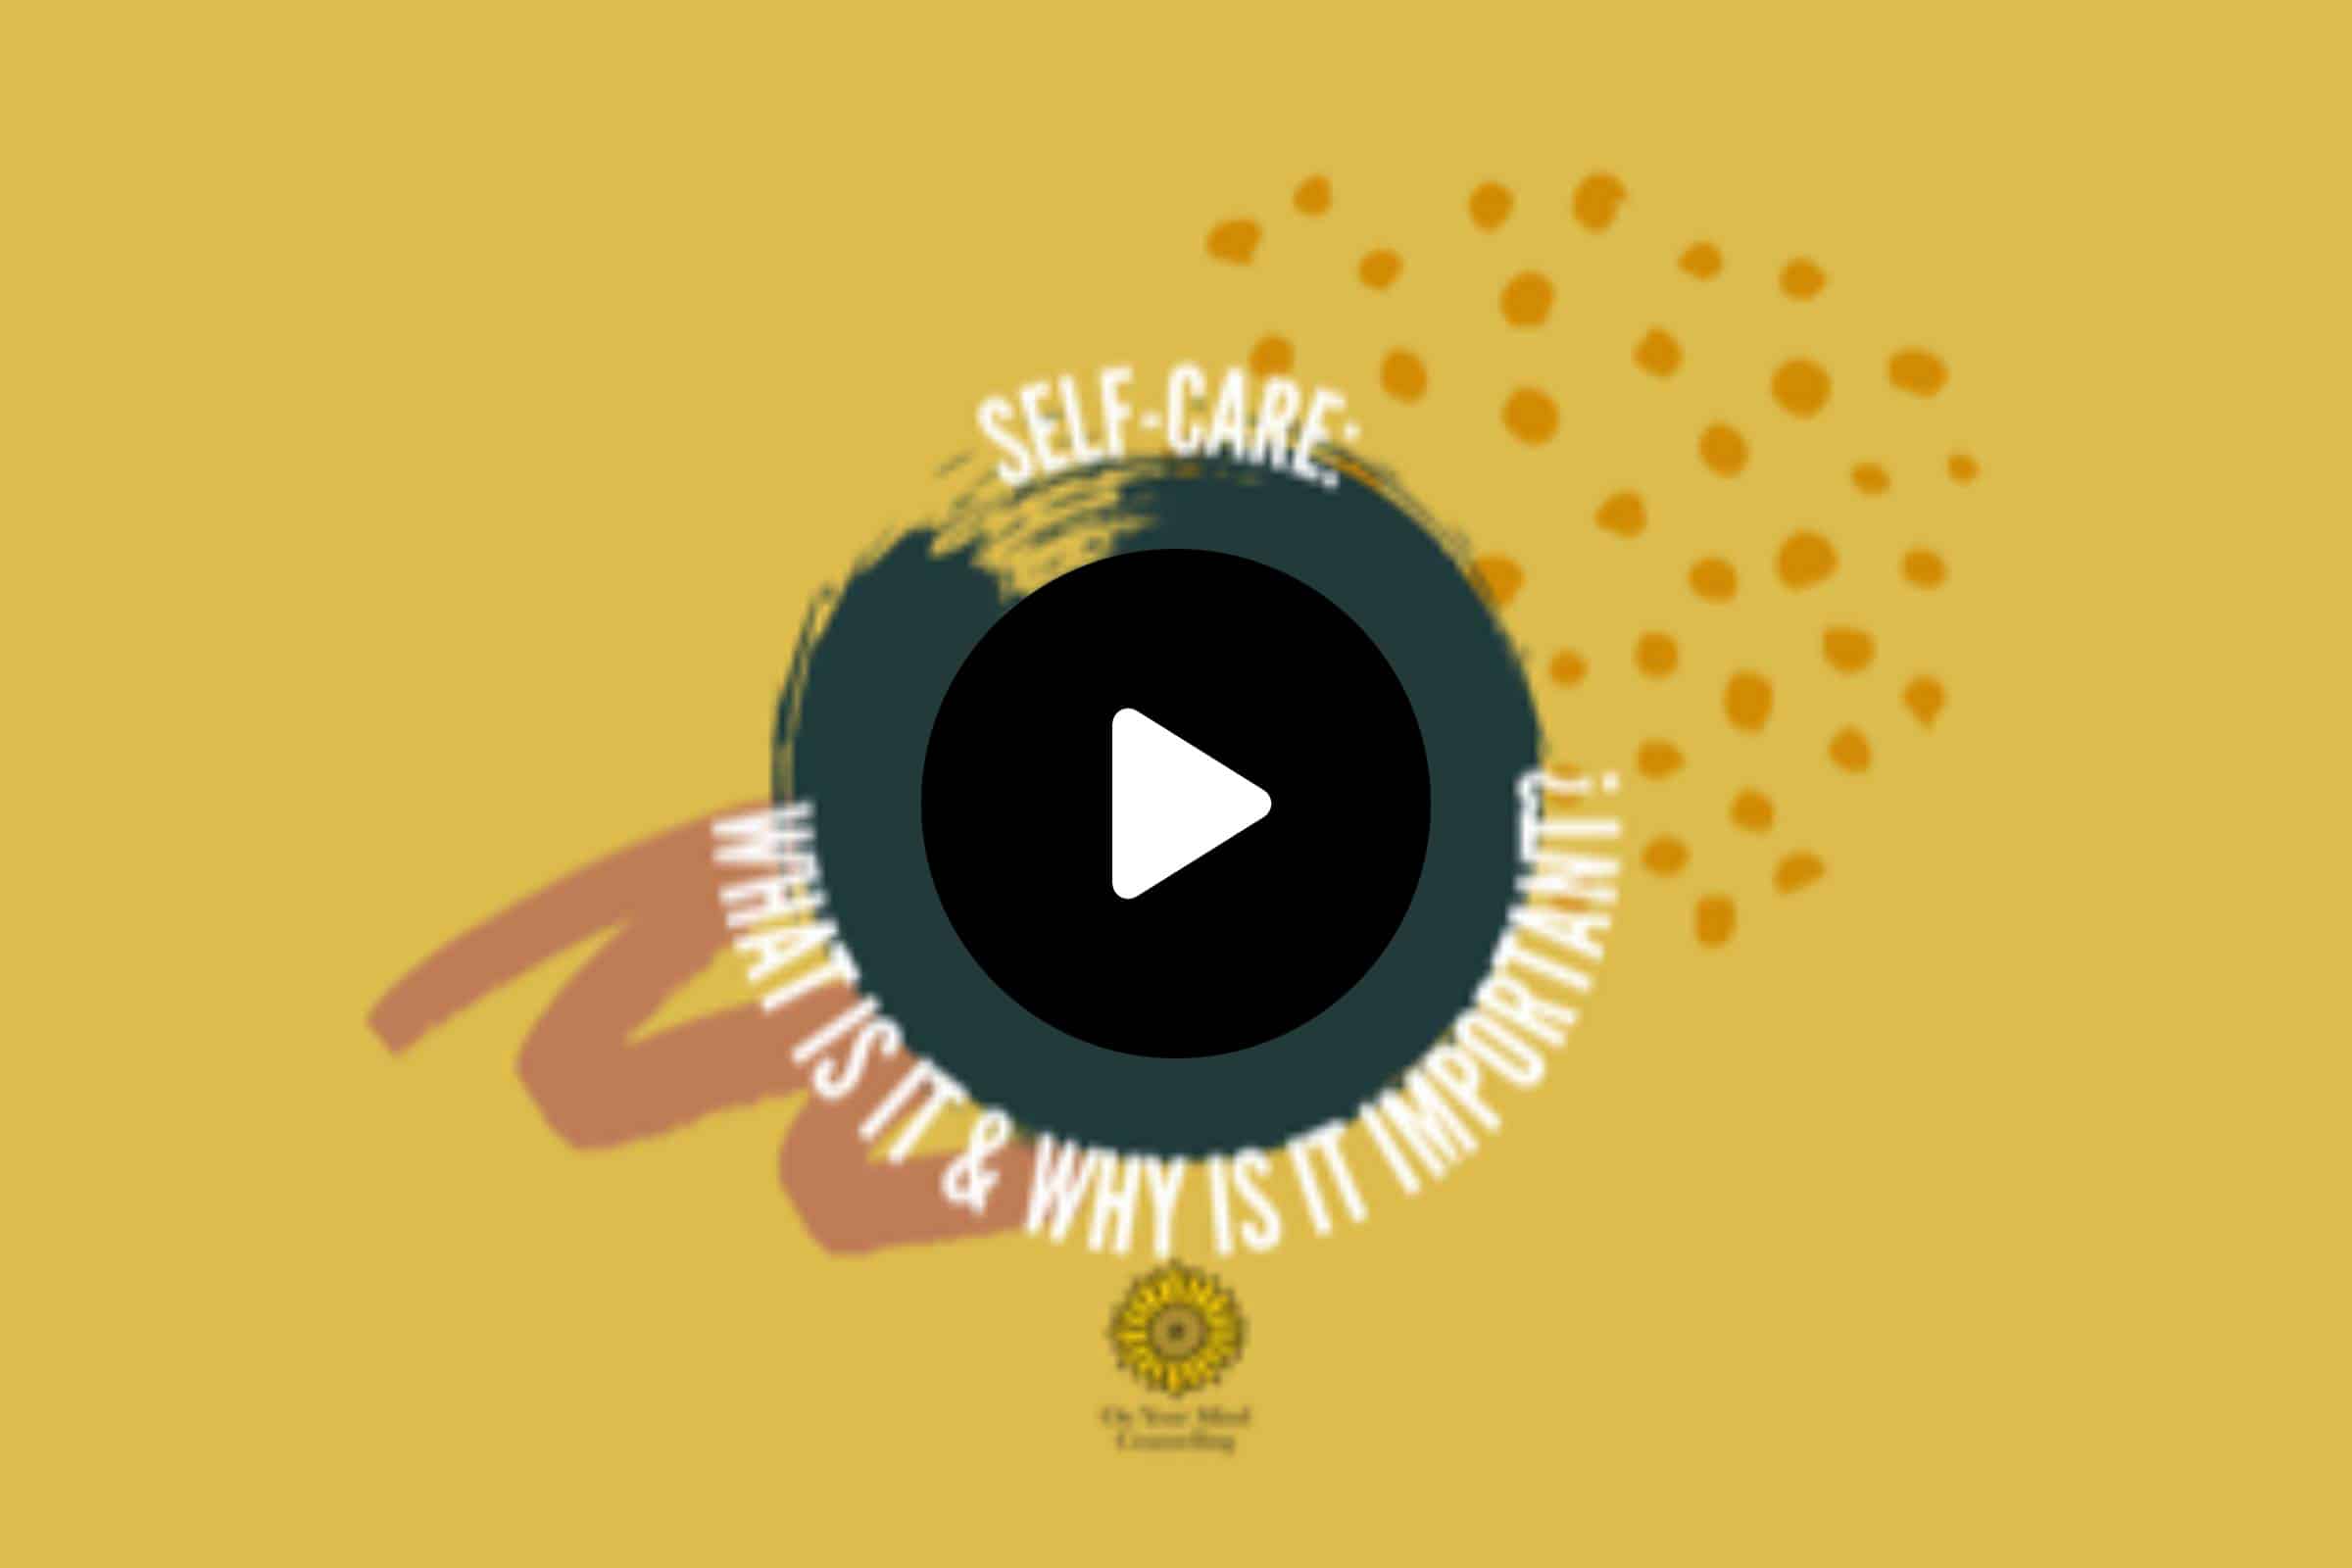 Self-Care - What is it and Why is it Important - Video Cover Image - On Your Mind Counselling